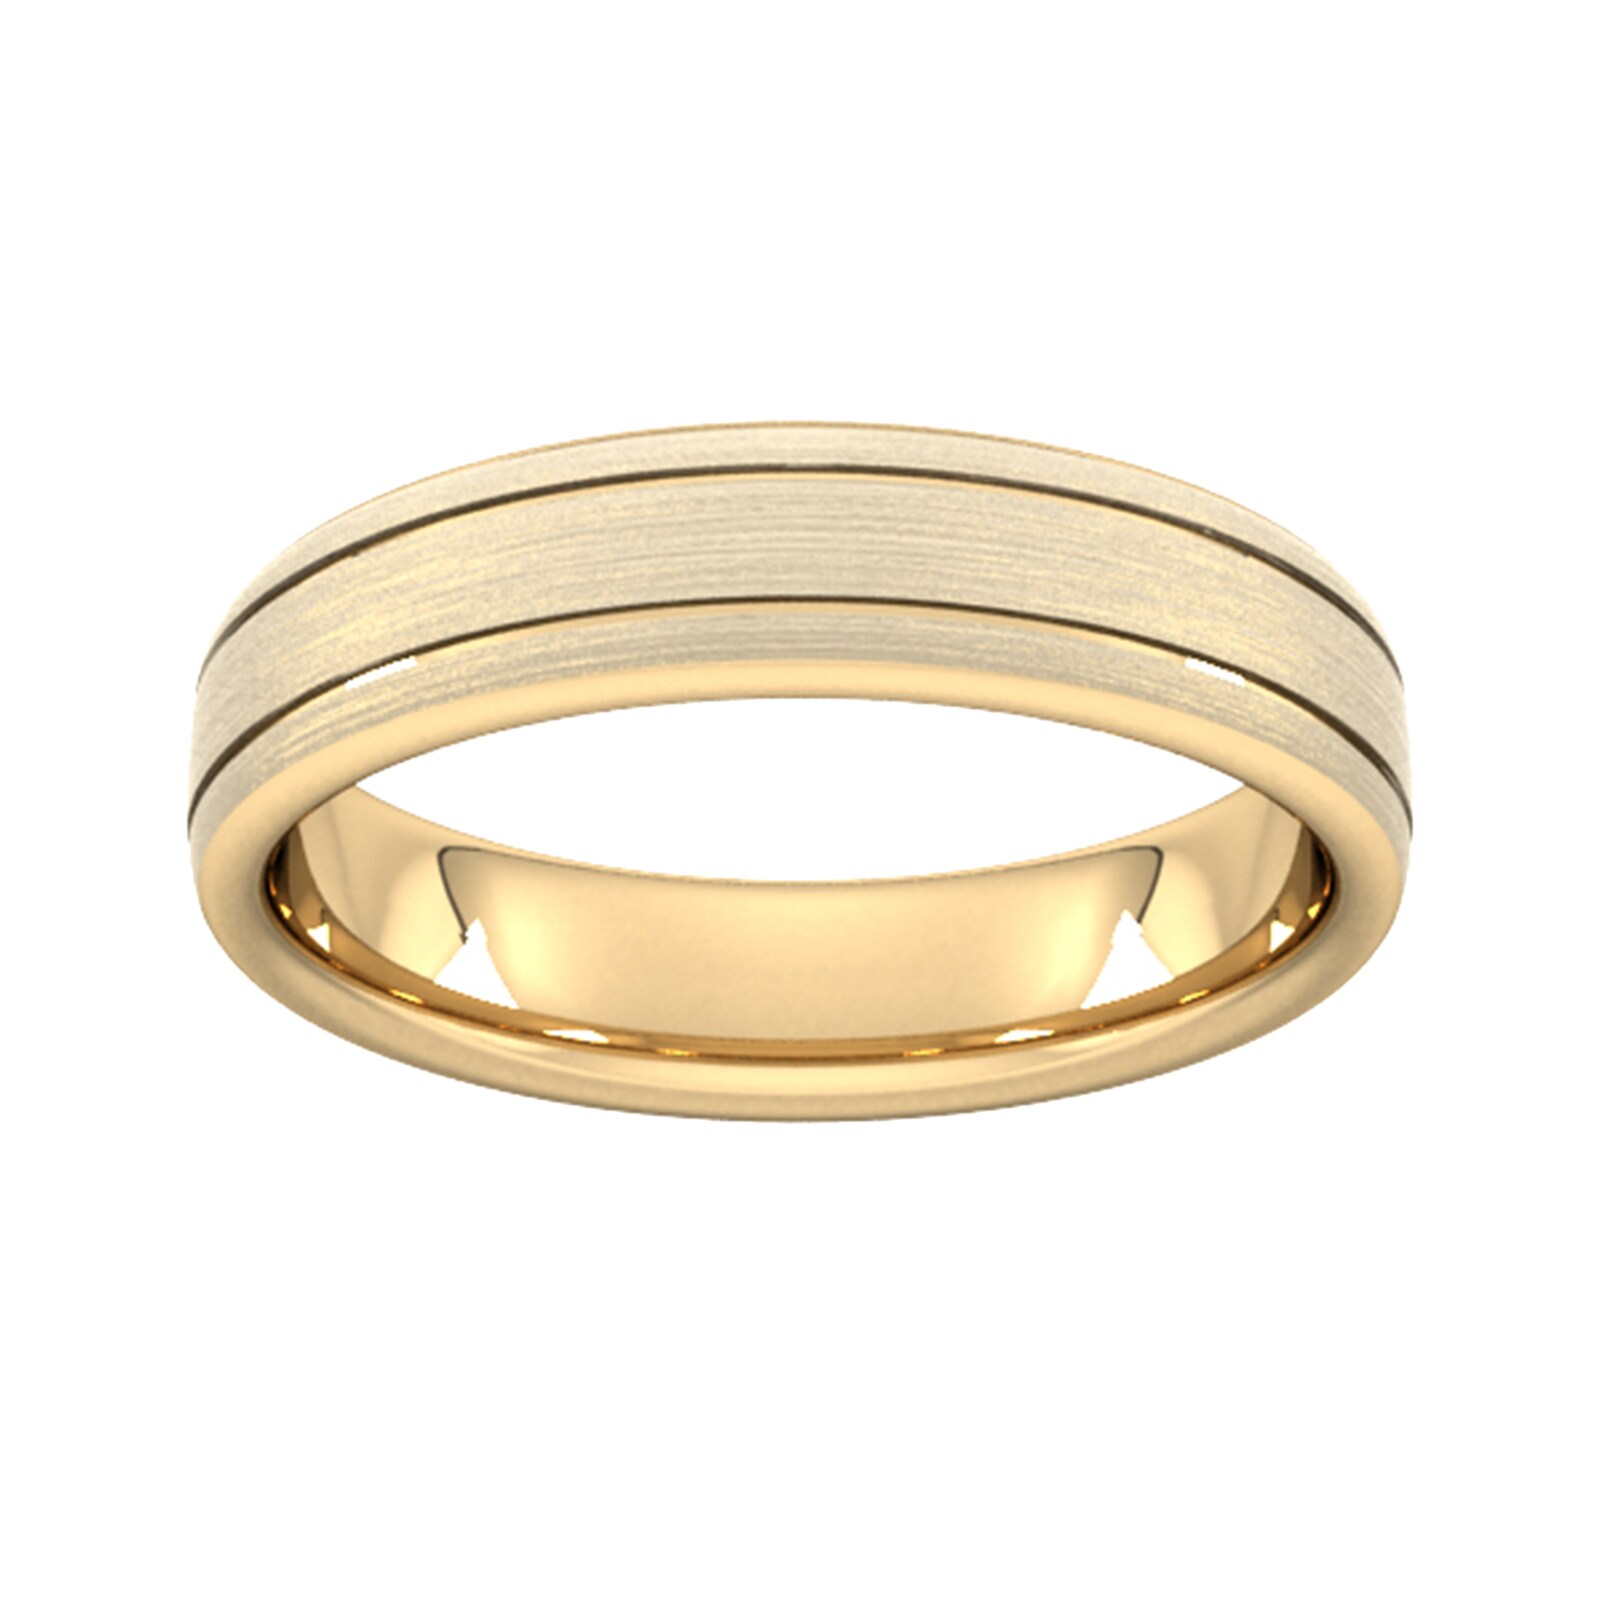 5mm Slight Court Heavy Matt Finish With Double Grooves Wedding Ring In 9 Carat Yellow Gold - Ring Size Q